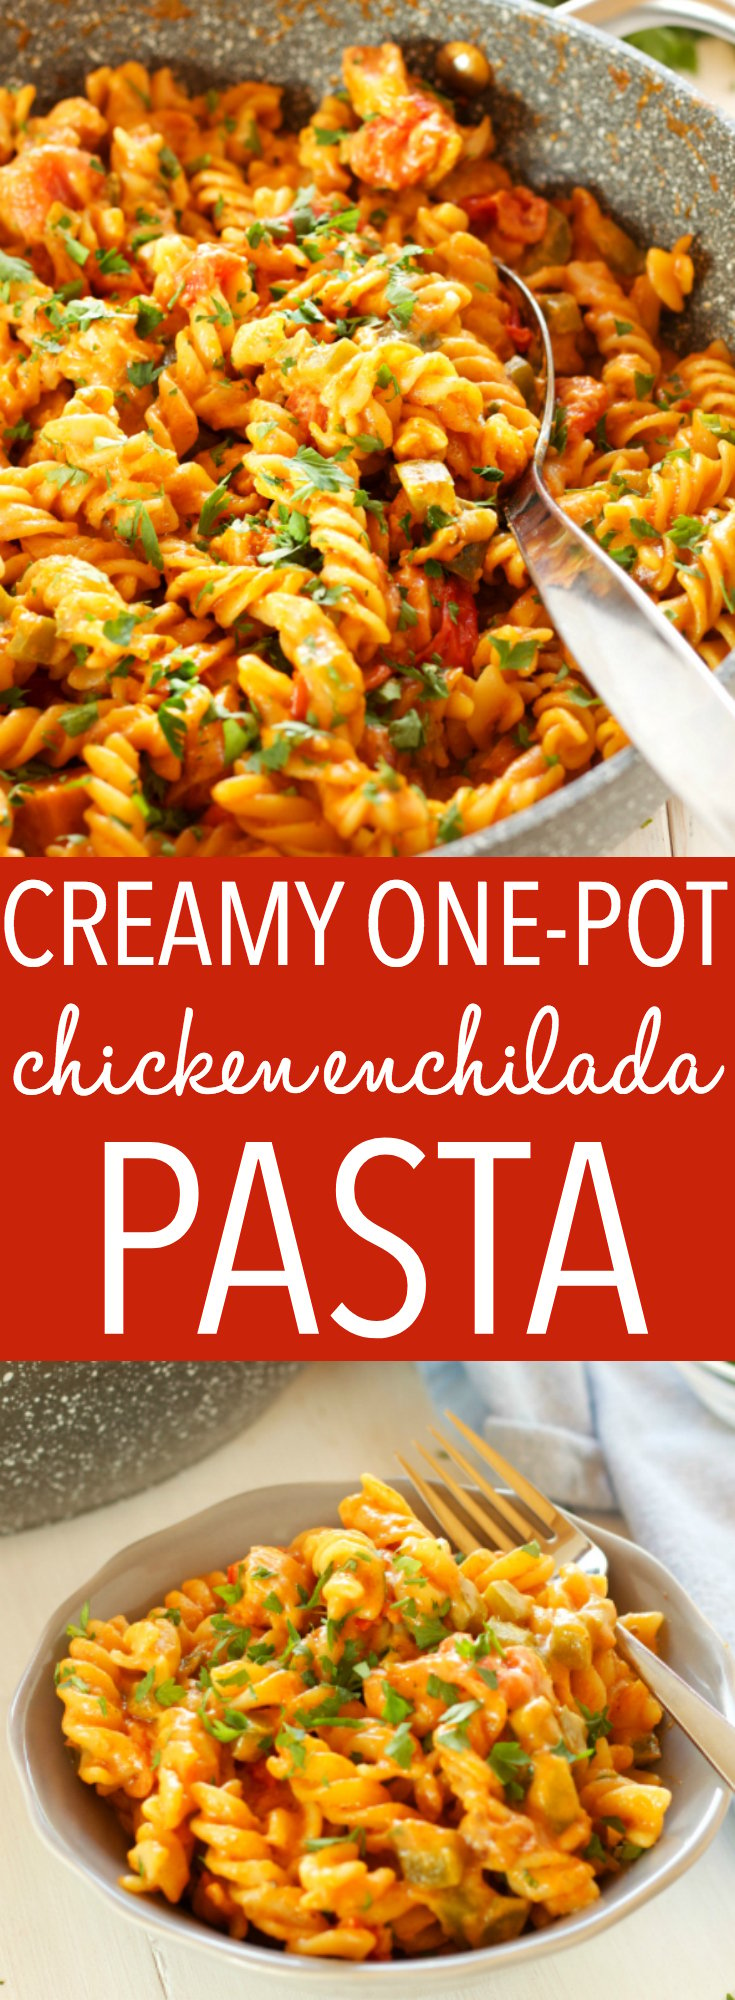 This Creamy One-Pot Chicken Enchilada Pasta is the perfect easy weeknight family meal made with simple ingredients in 30 minutes or less! Recipe from thebusybaker.ca! #easyfamilymeal #familymeal #weeknightmeal #onepotpasta #enchiladapasta via @busybakerblog